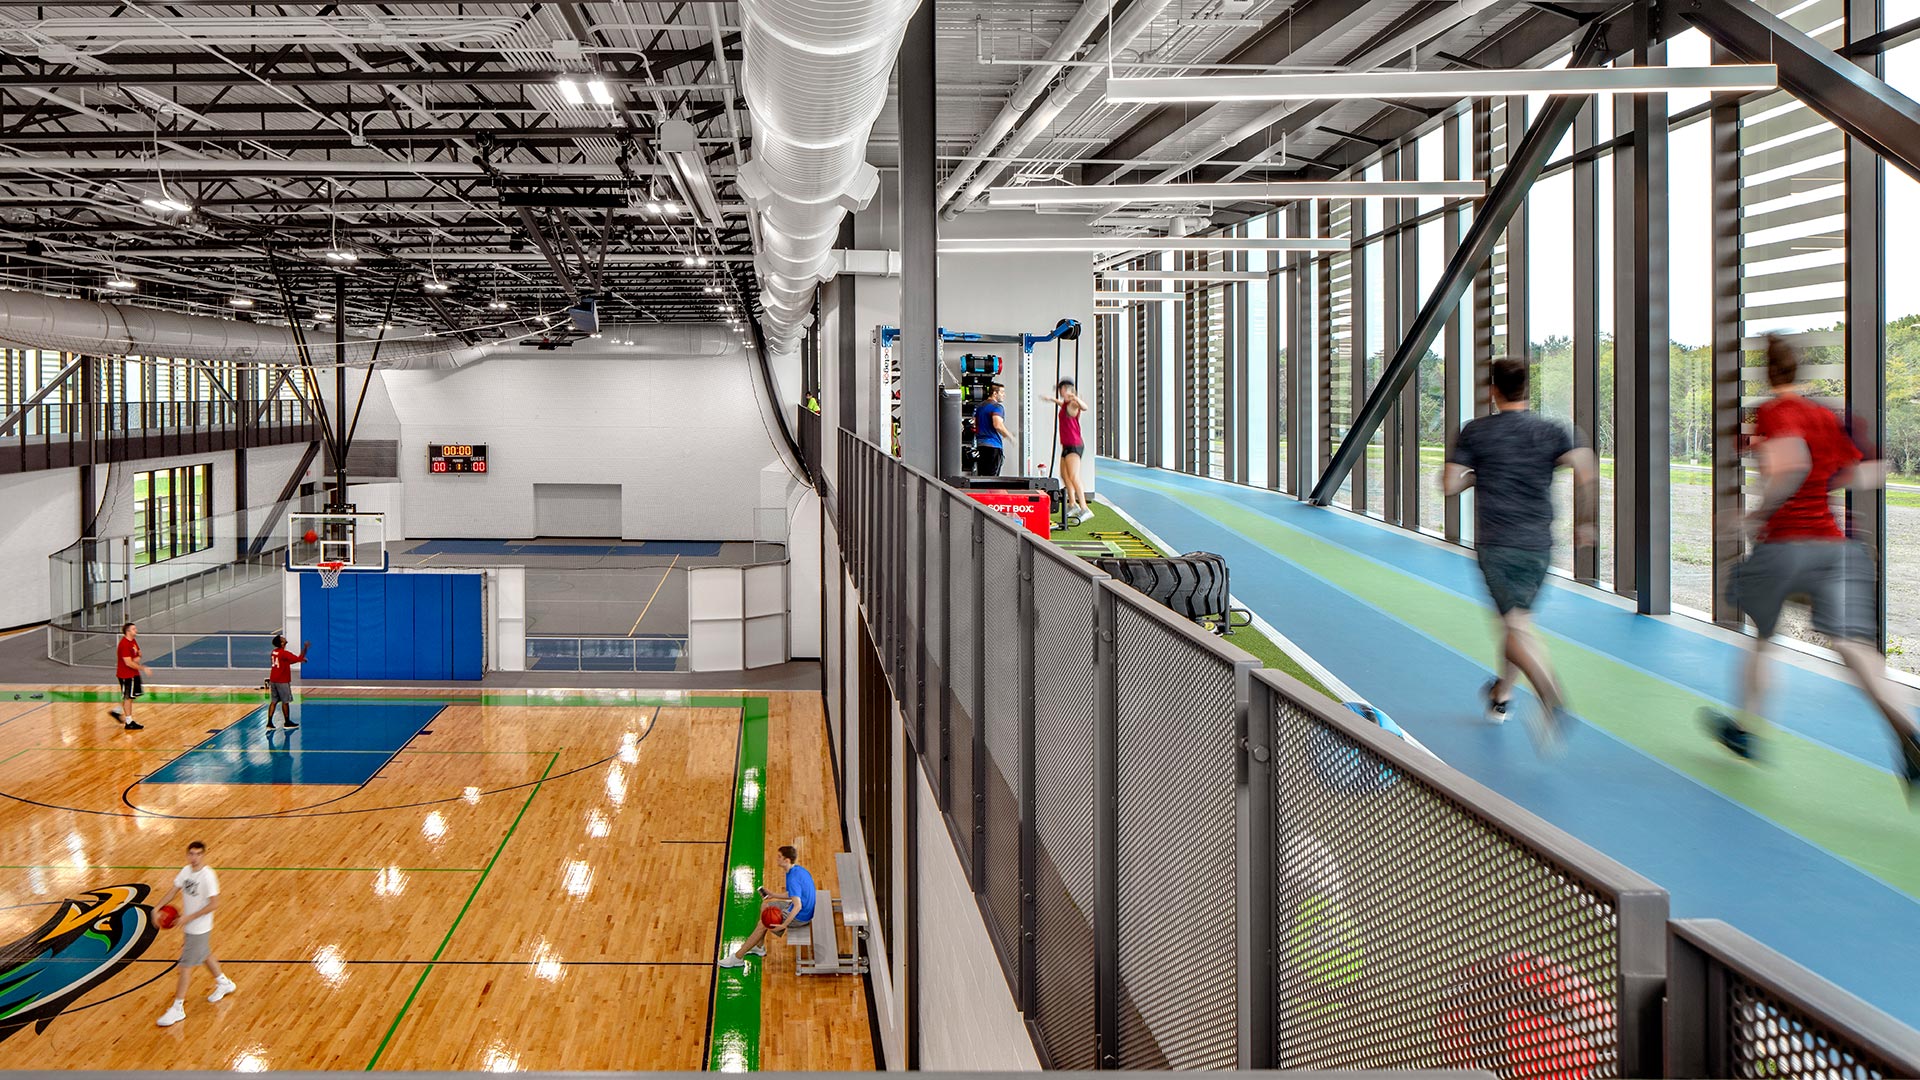 Students running on the indoor track and playing on a basketball court